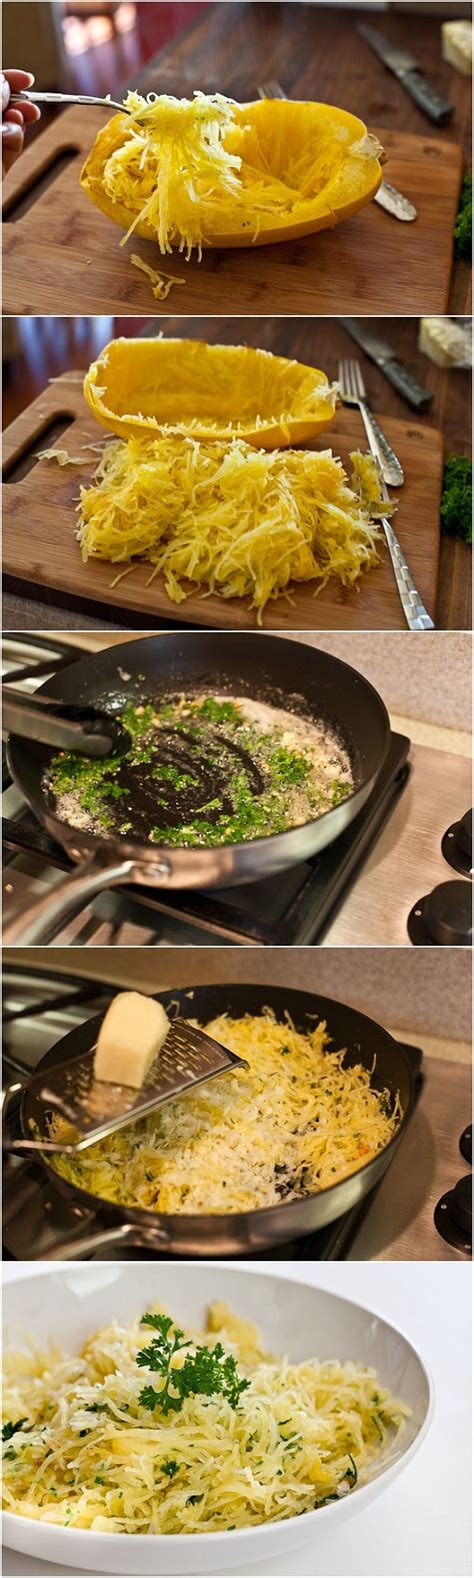 Baked Spaghetti Squash With Garlic And Butter Recipe